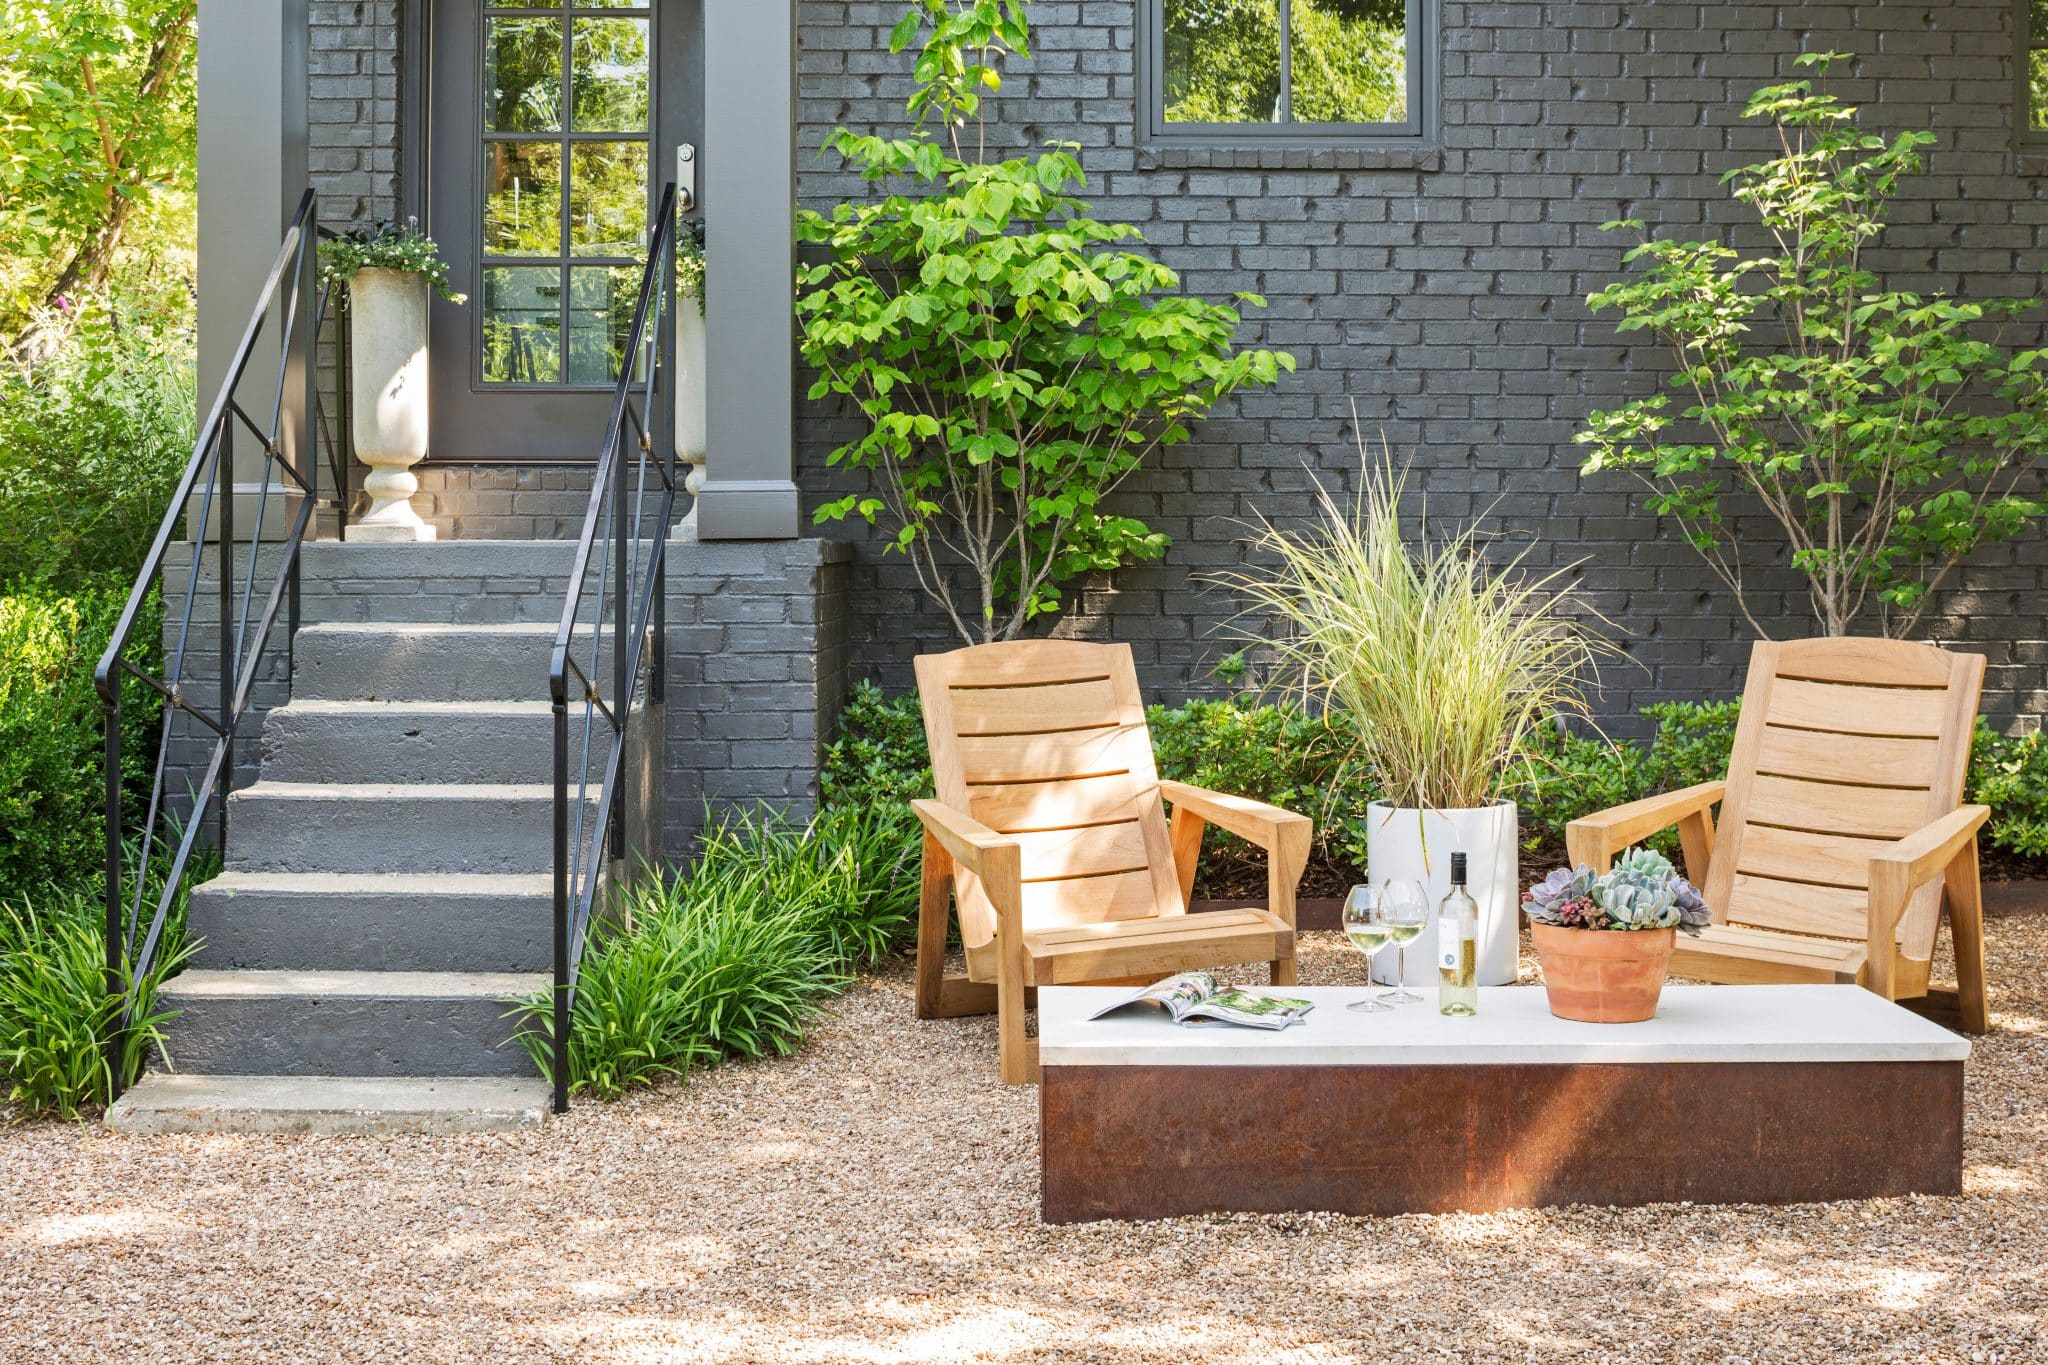 It’s A New Year For Pavers – How Will You Redecorate Your Backyard Space?